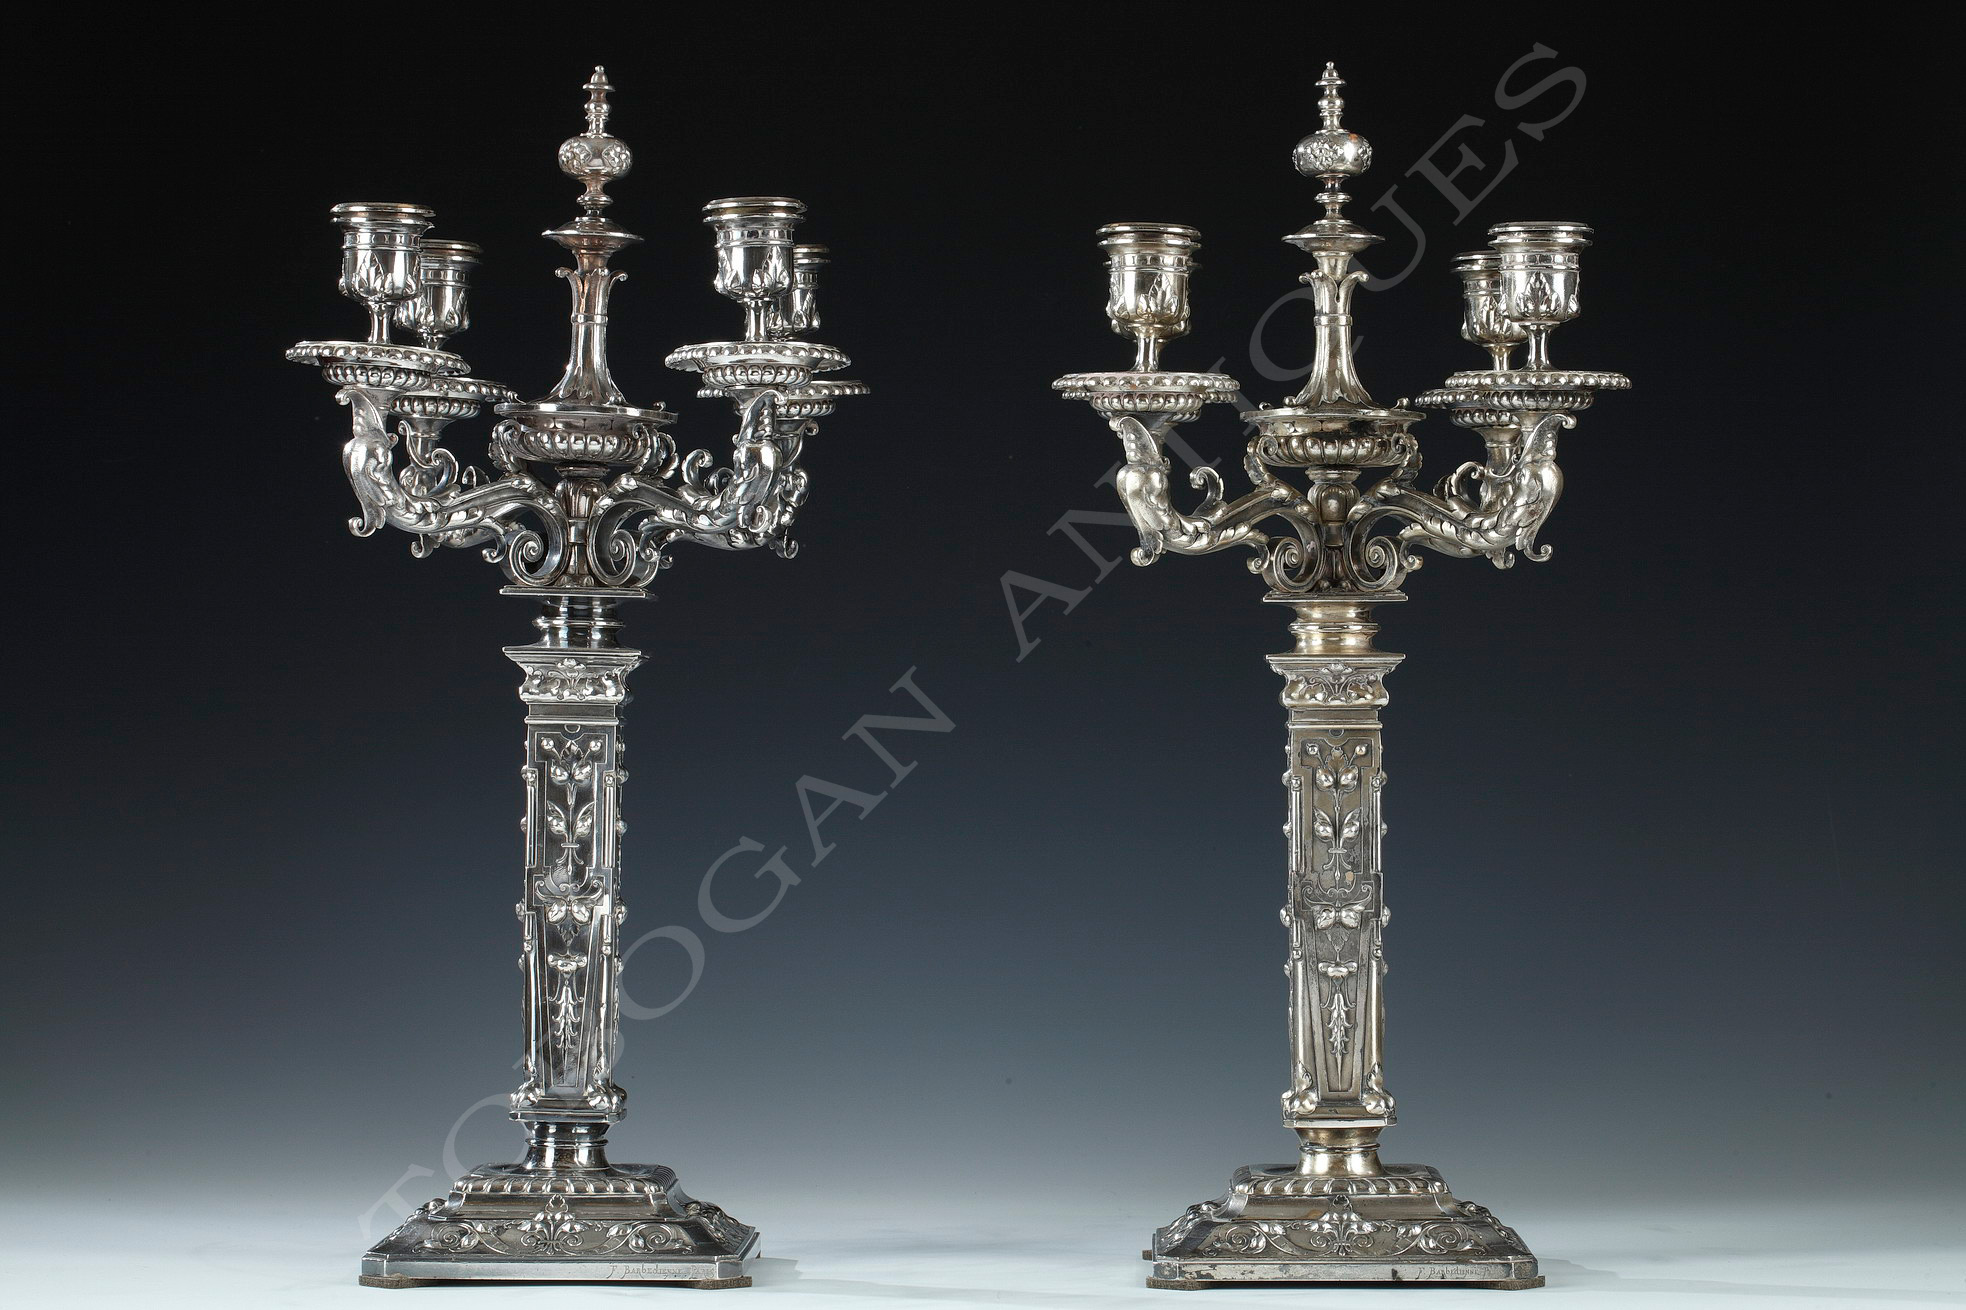 F. Barbedienne, L-C Sevin and D. Attarge <br/> Pair of Renaissance style candelabra